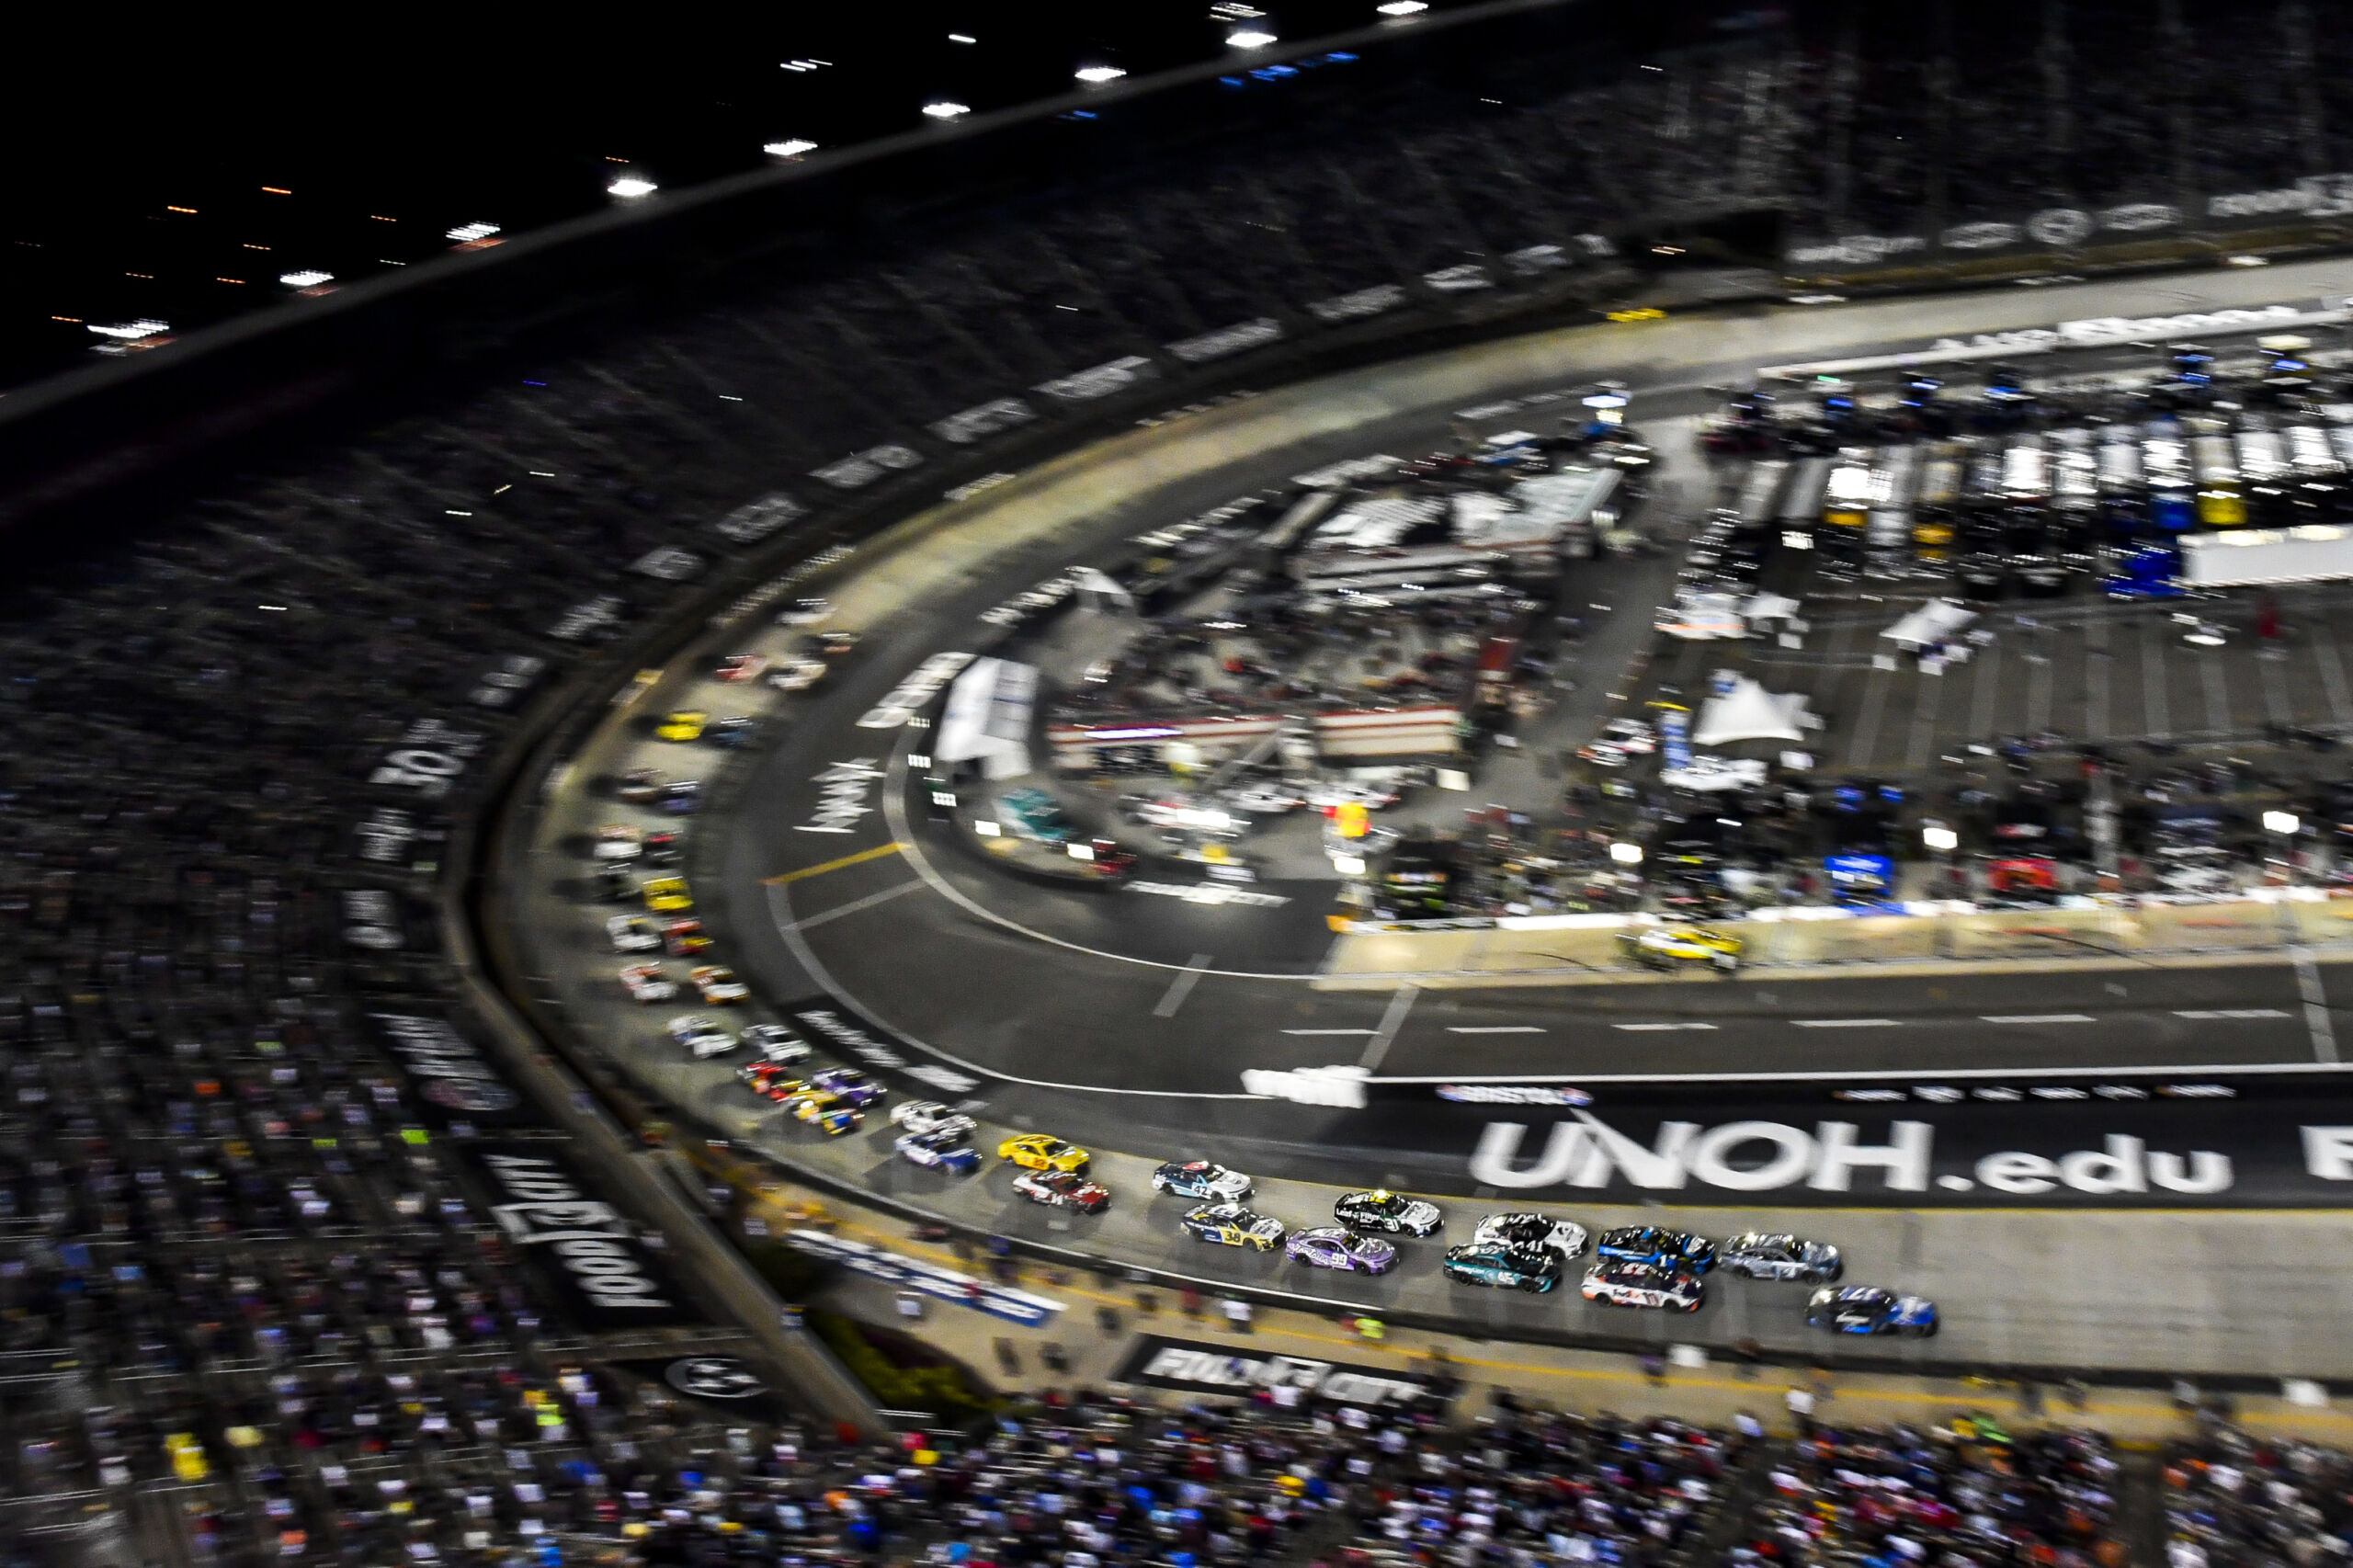 NASCAR Bristol playoff race not being broadcast on NBC